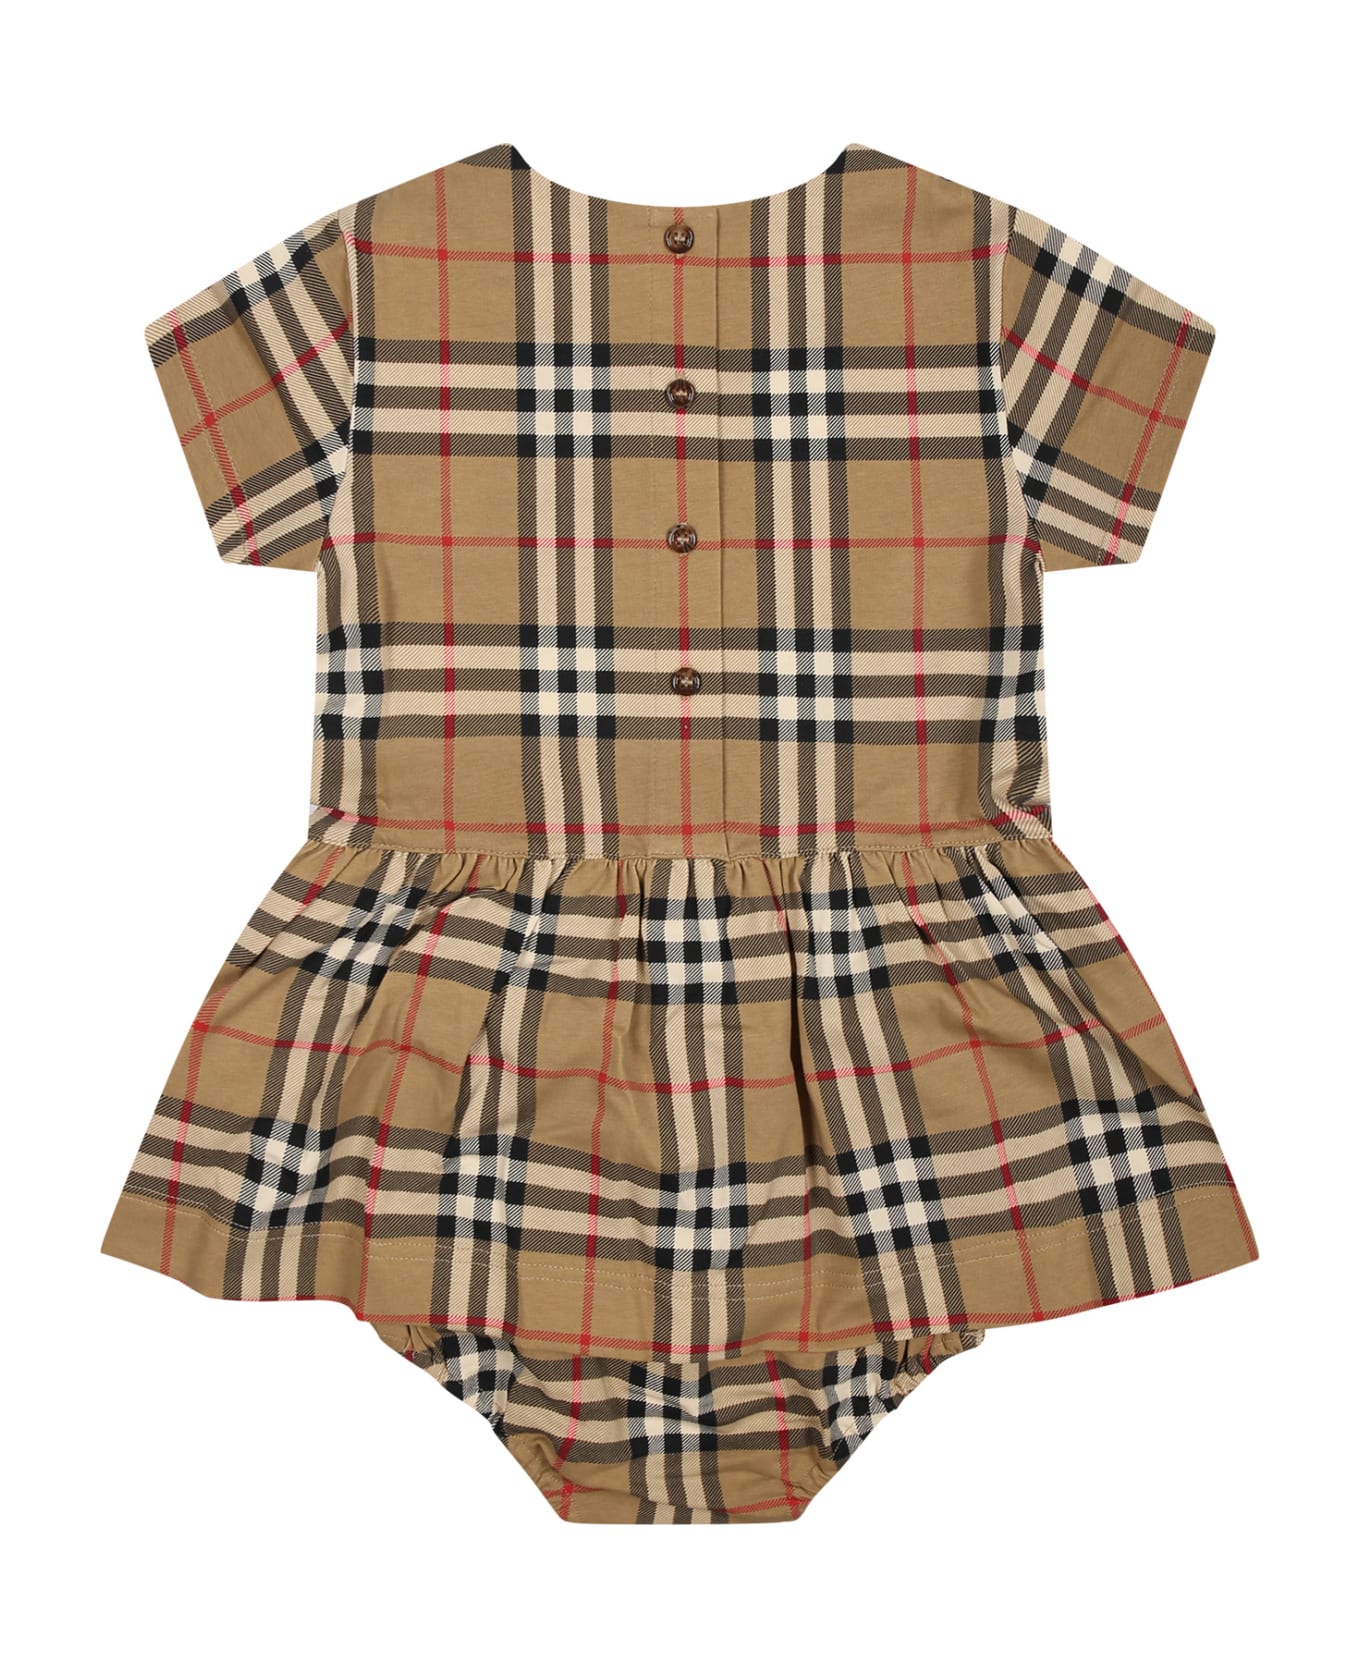 Burberry Beige Dress For Baby Girl With Iconic All-over Vintage Check - Beige ウェア